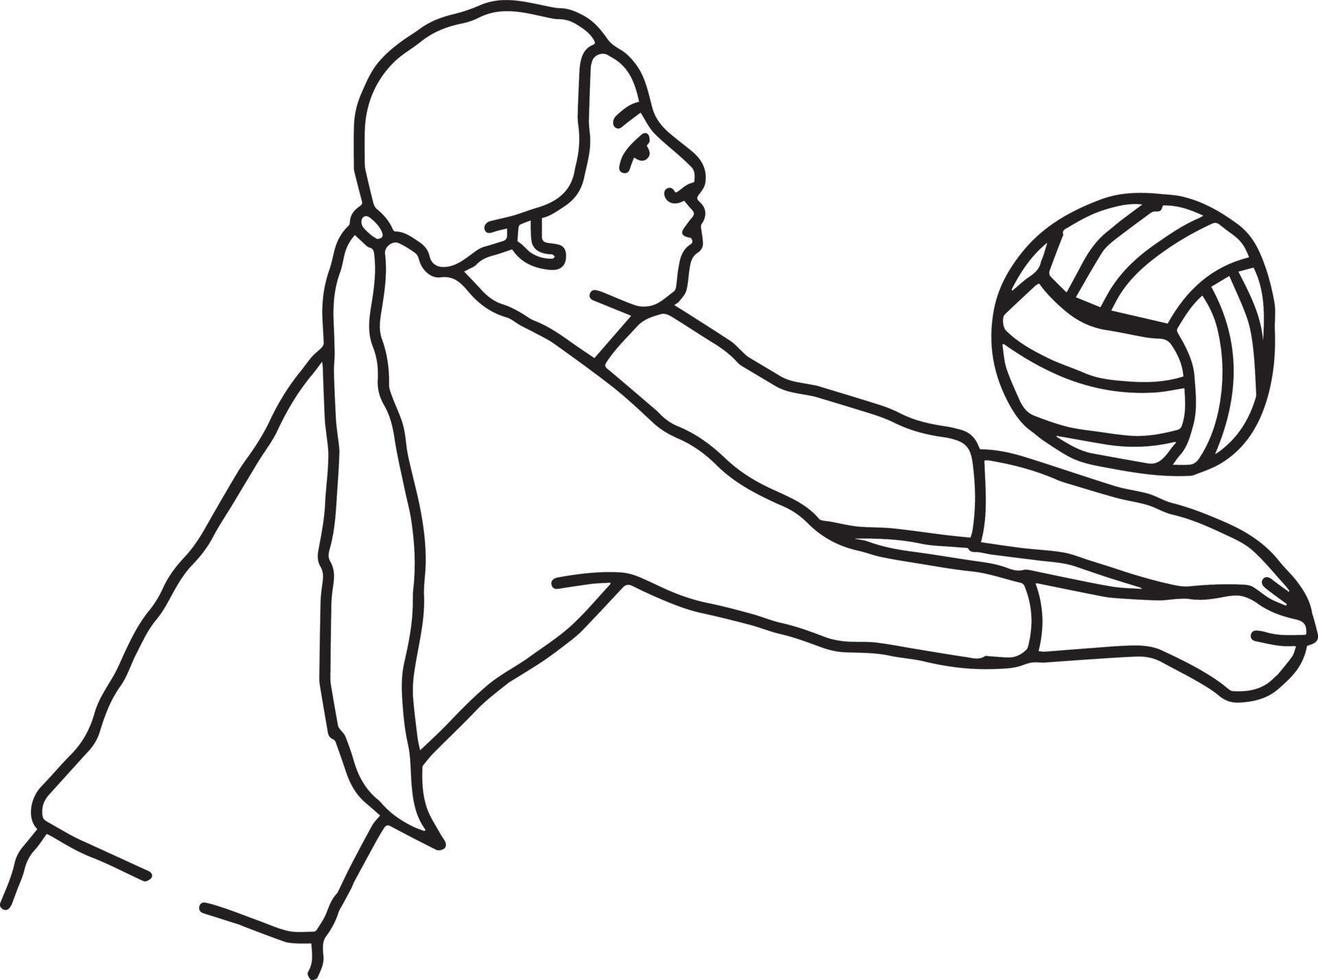 volleyball player - vector illustration sketch hand drawn